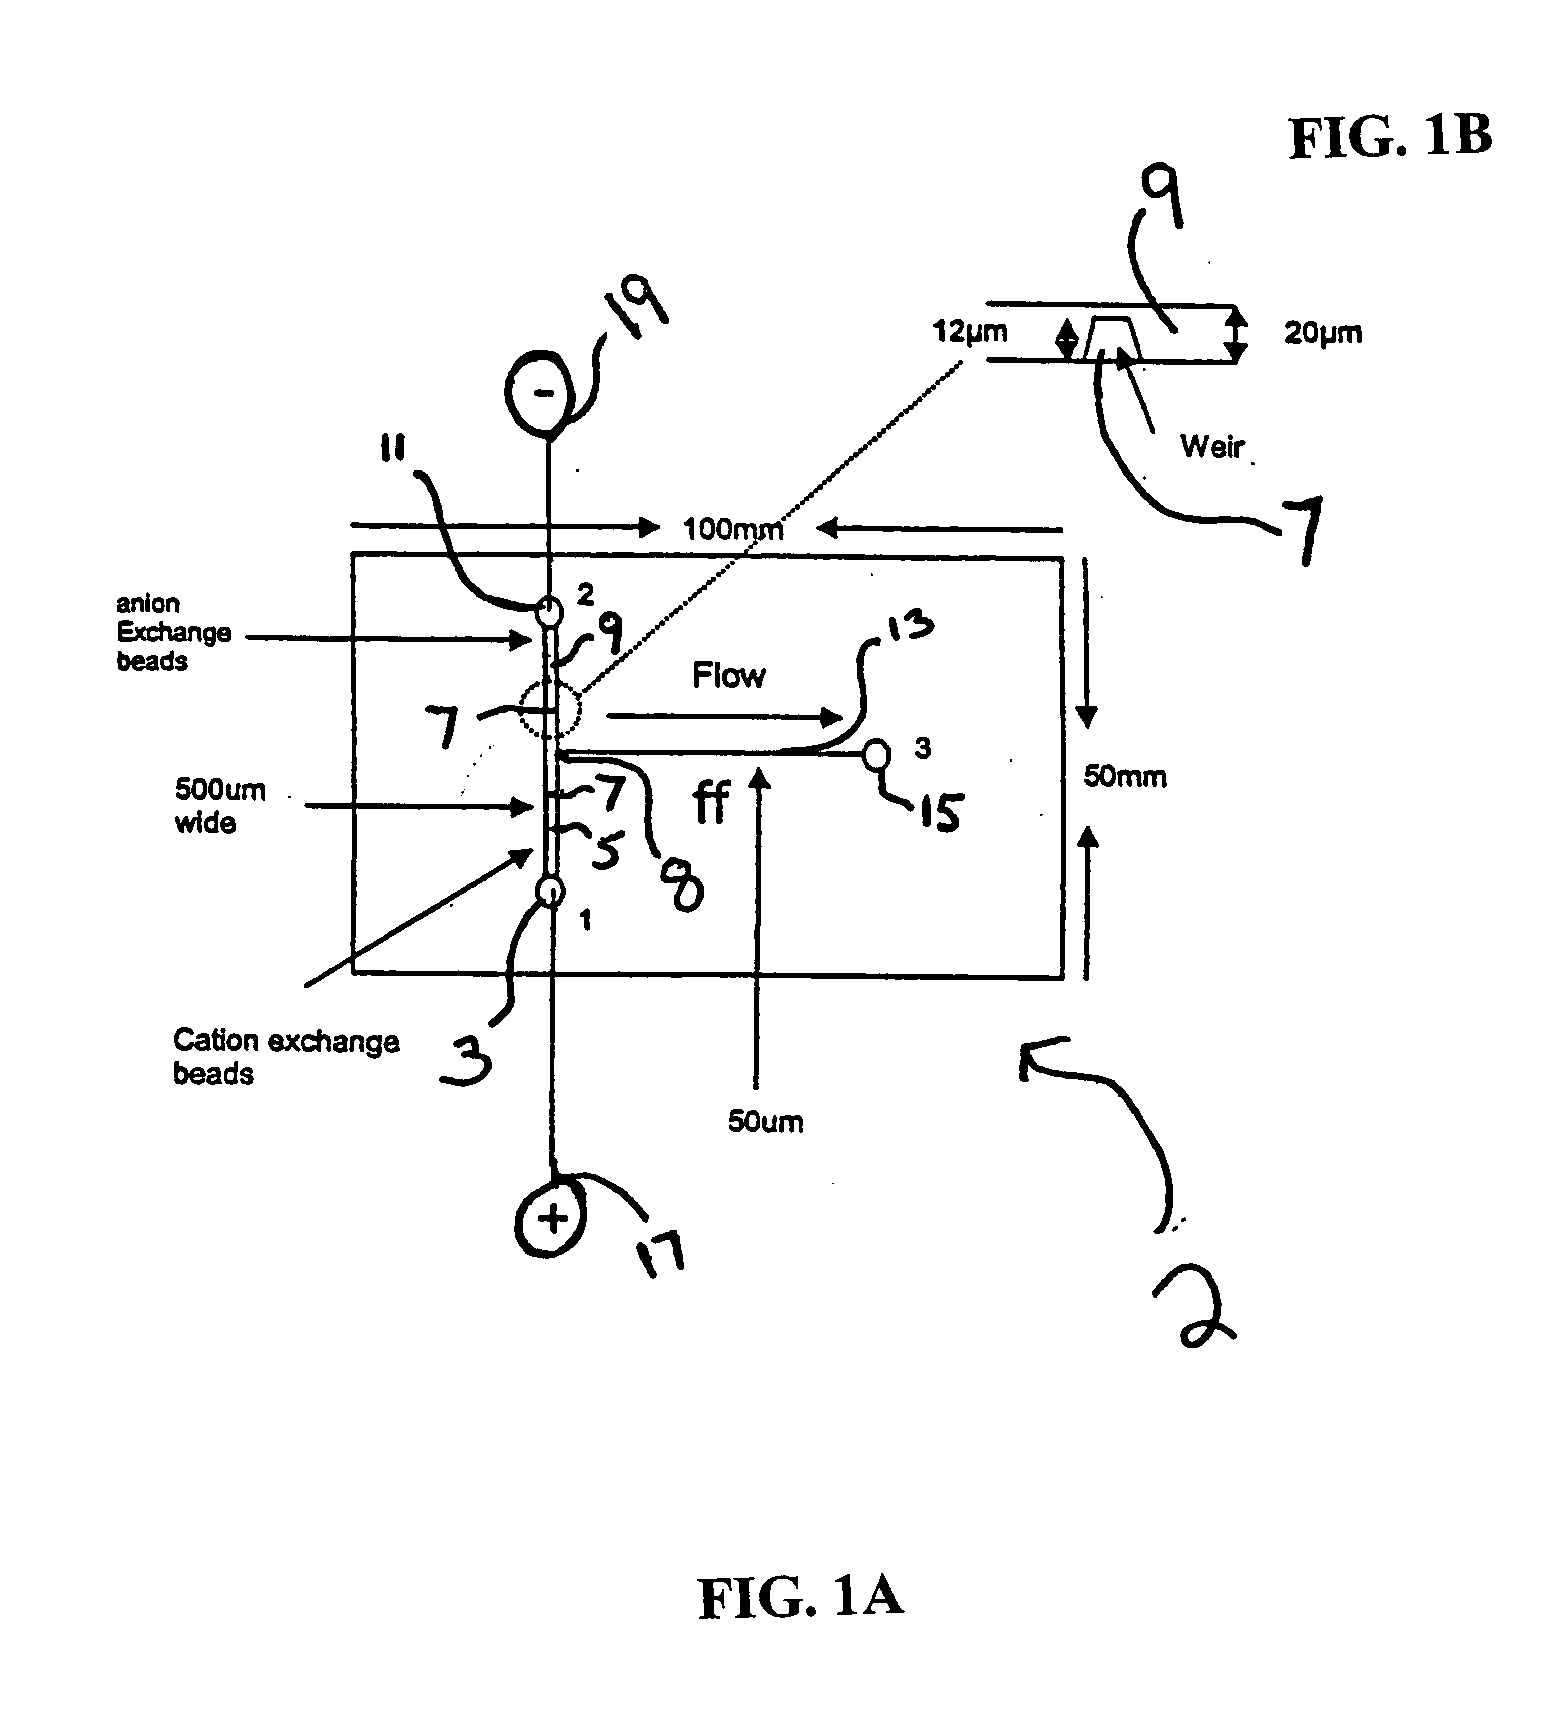 Apparatus and method for Edman degradation on a microfluidic device utilizing an electroosmotic flow pump